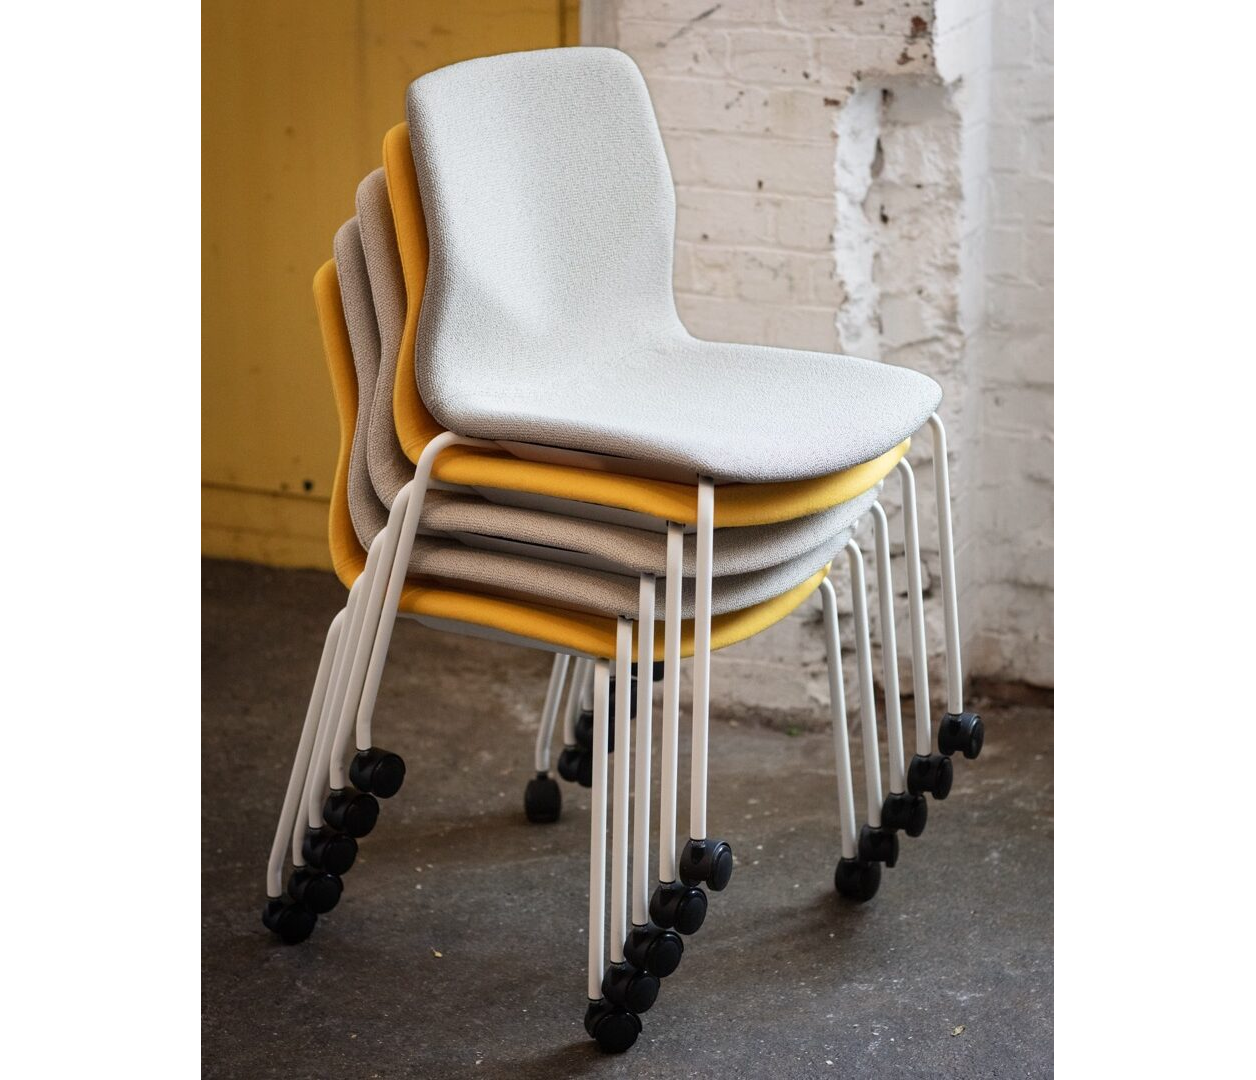 OCEE&FOUR – Chairs – FourSure 77 – Lifestyle Image 14 Large